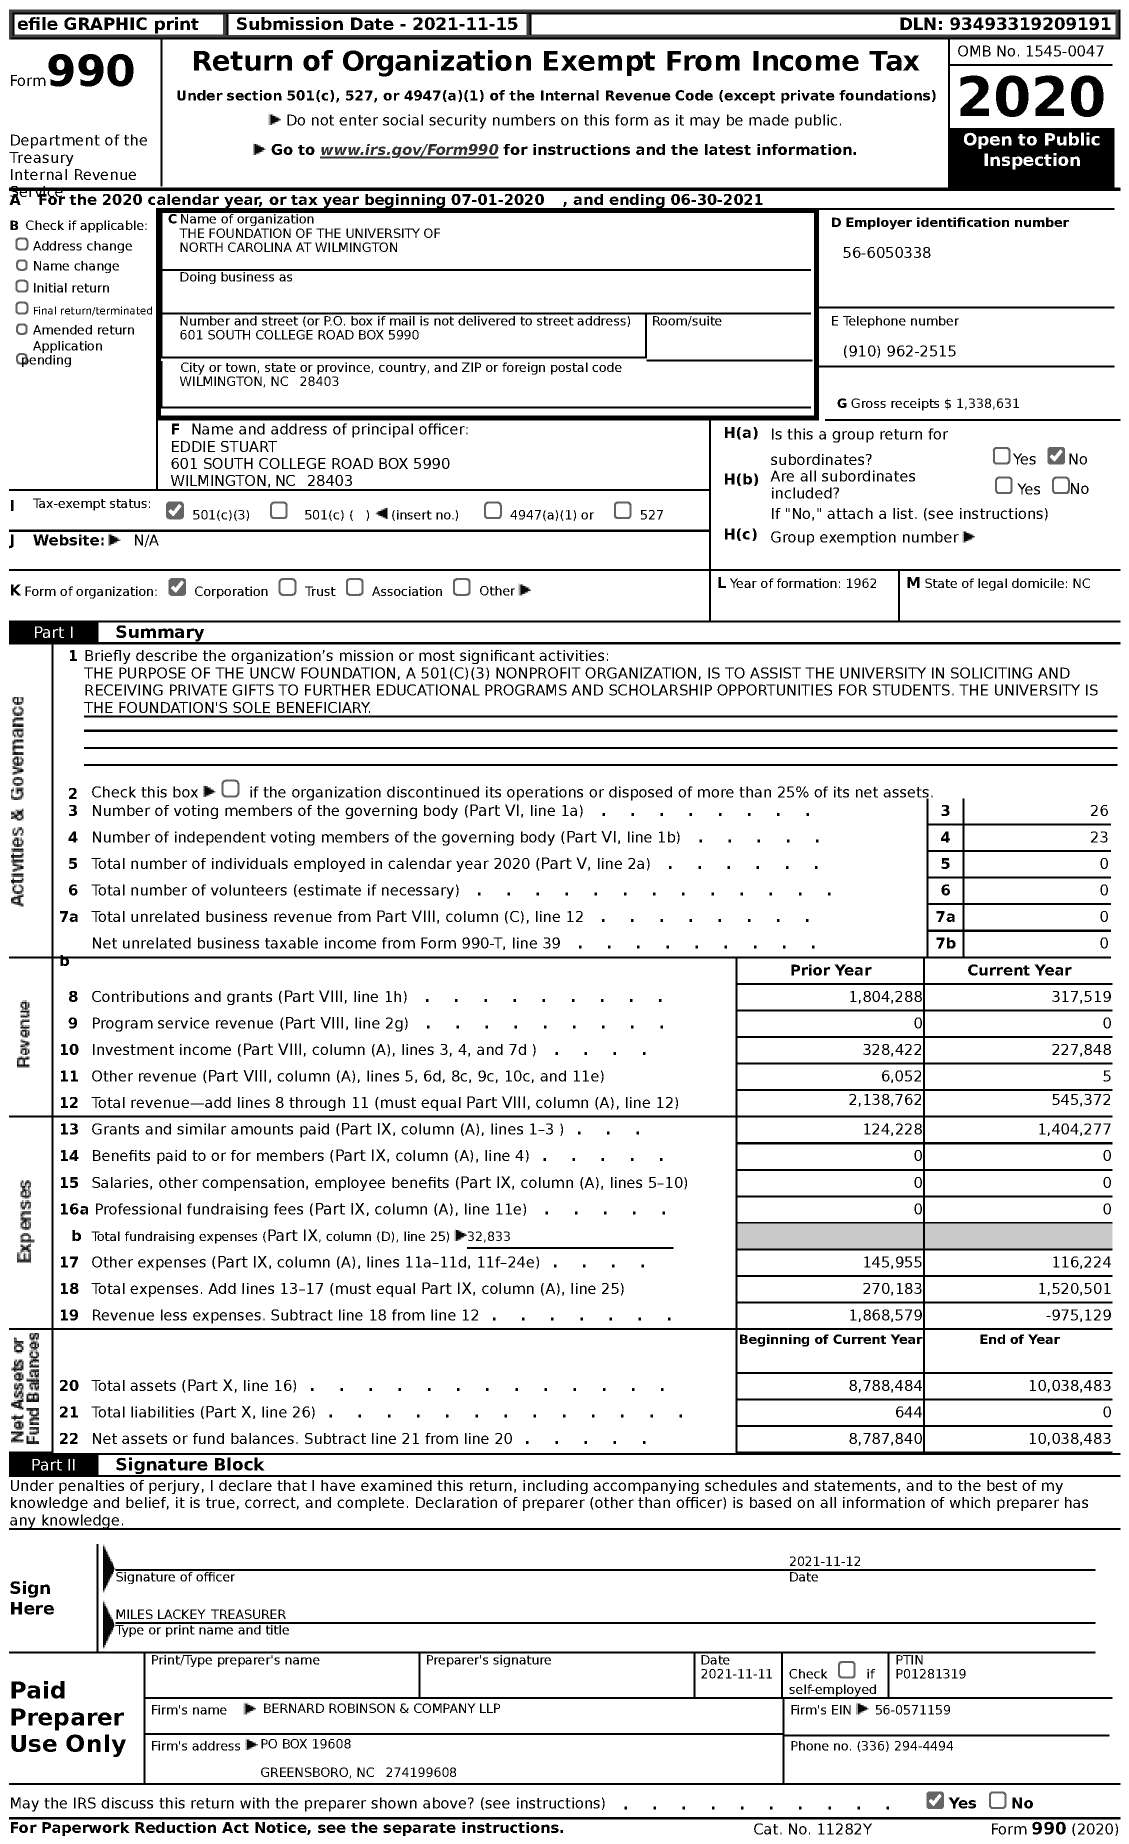 Image of first page of 2020 Form 990 for the Foundation of the University of North Carolina at Wilmington